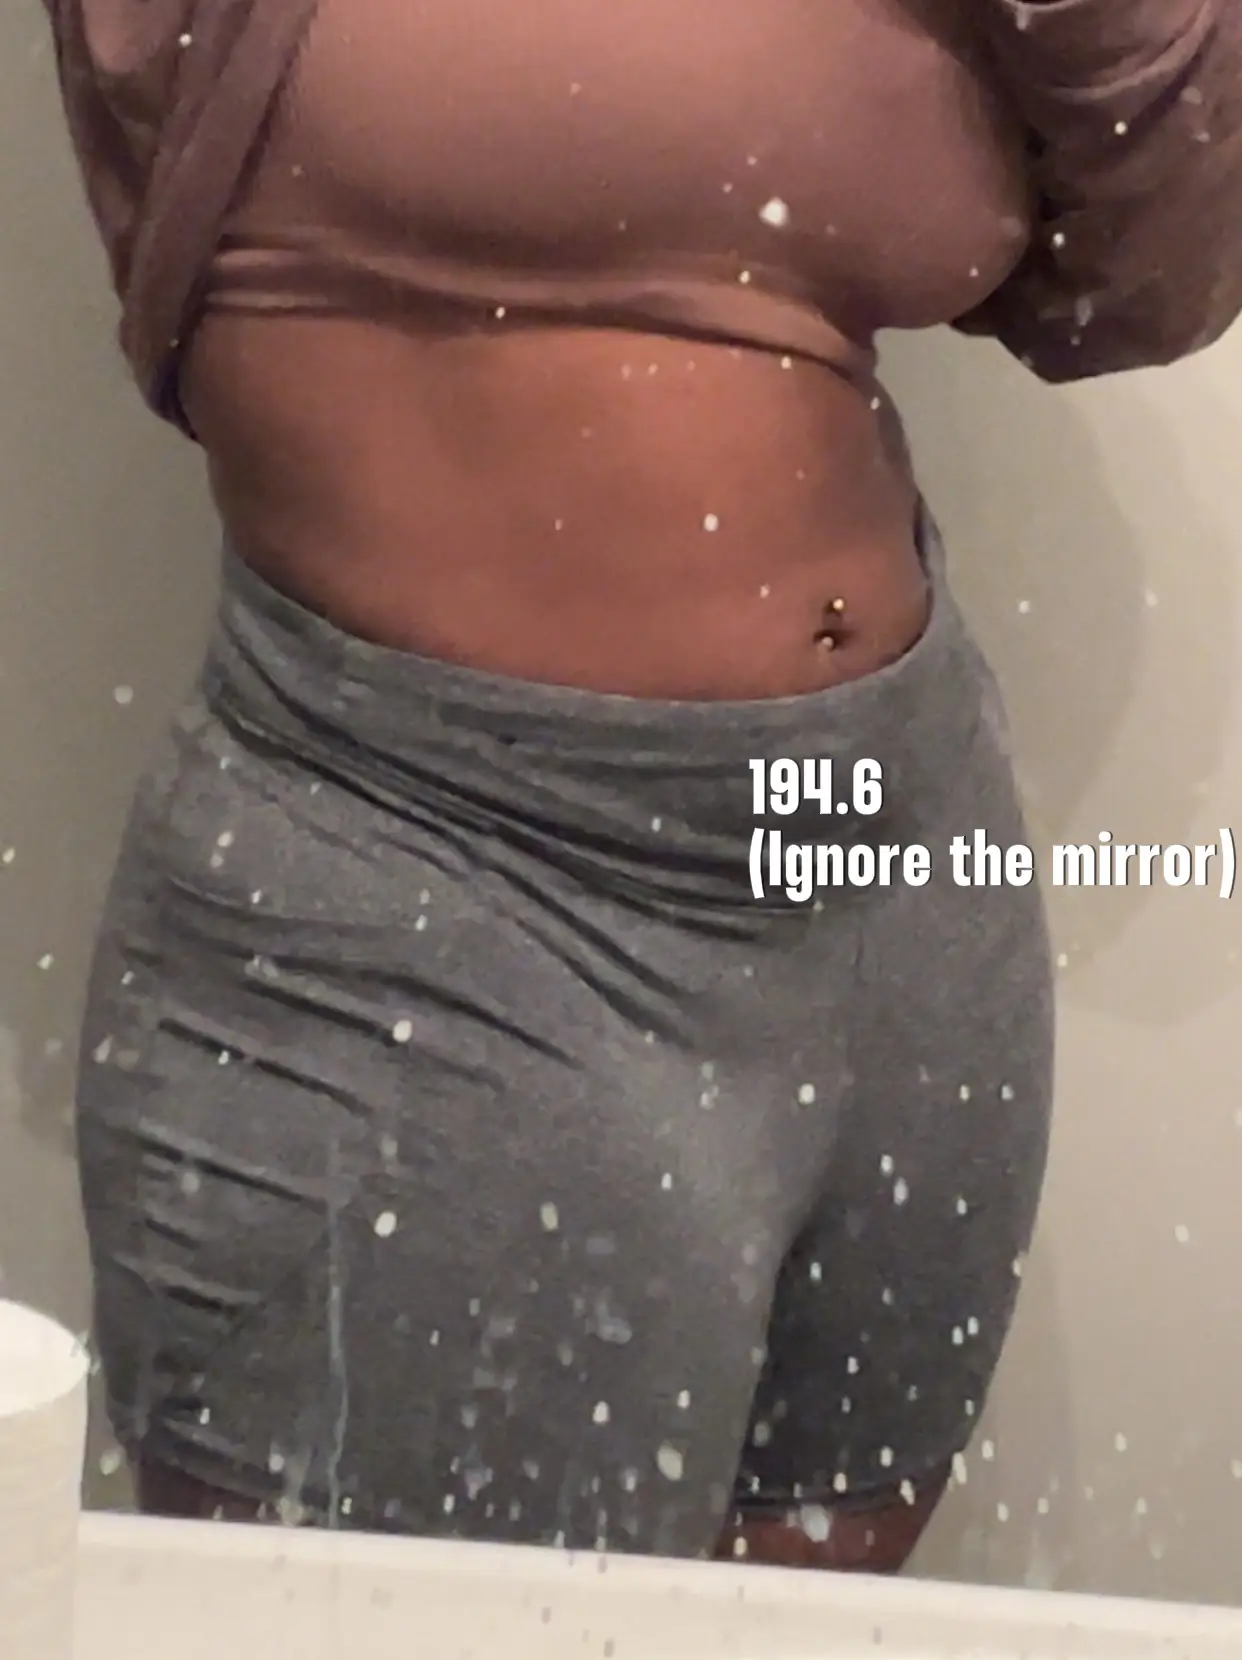 Flat chest and abs : r/sfwpetite